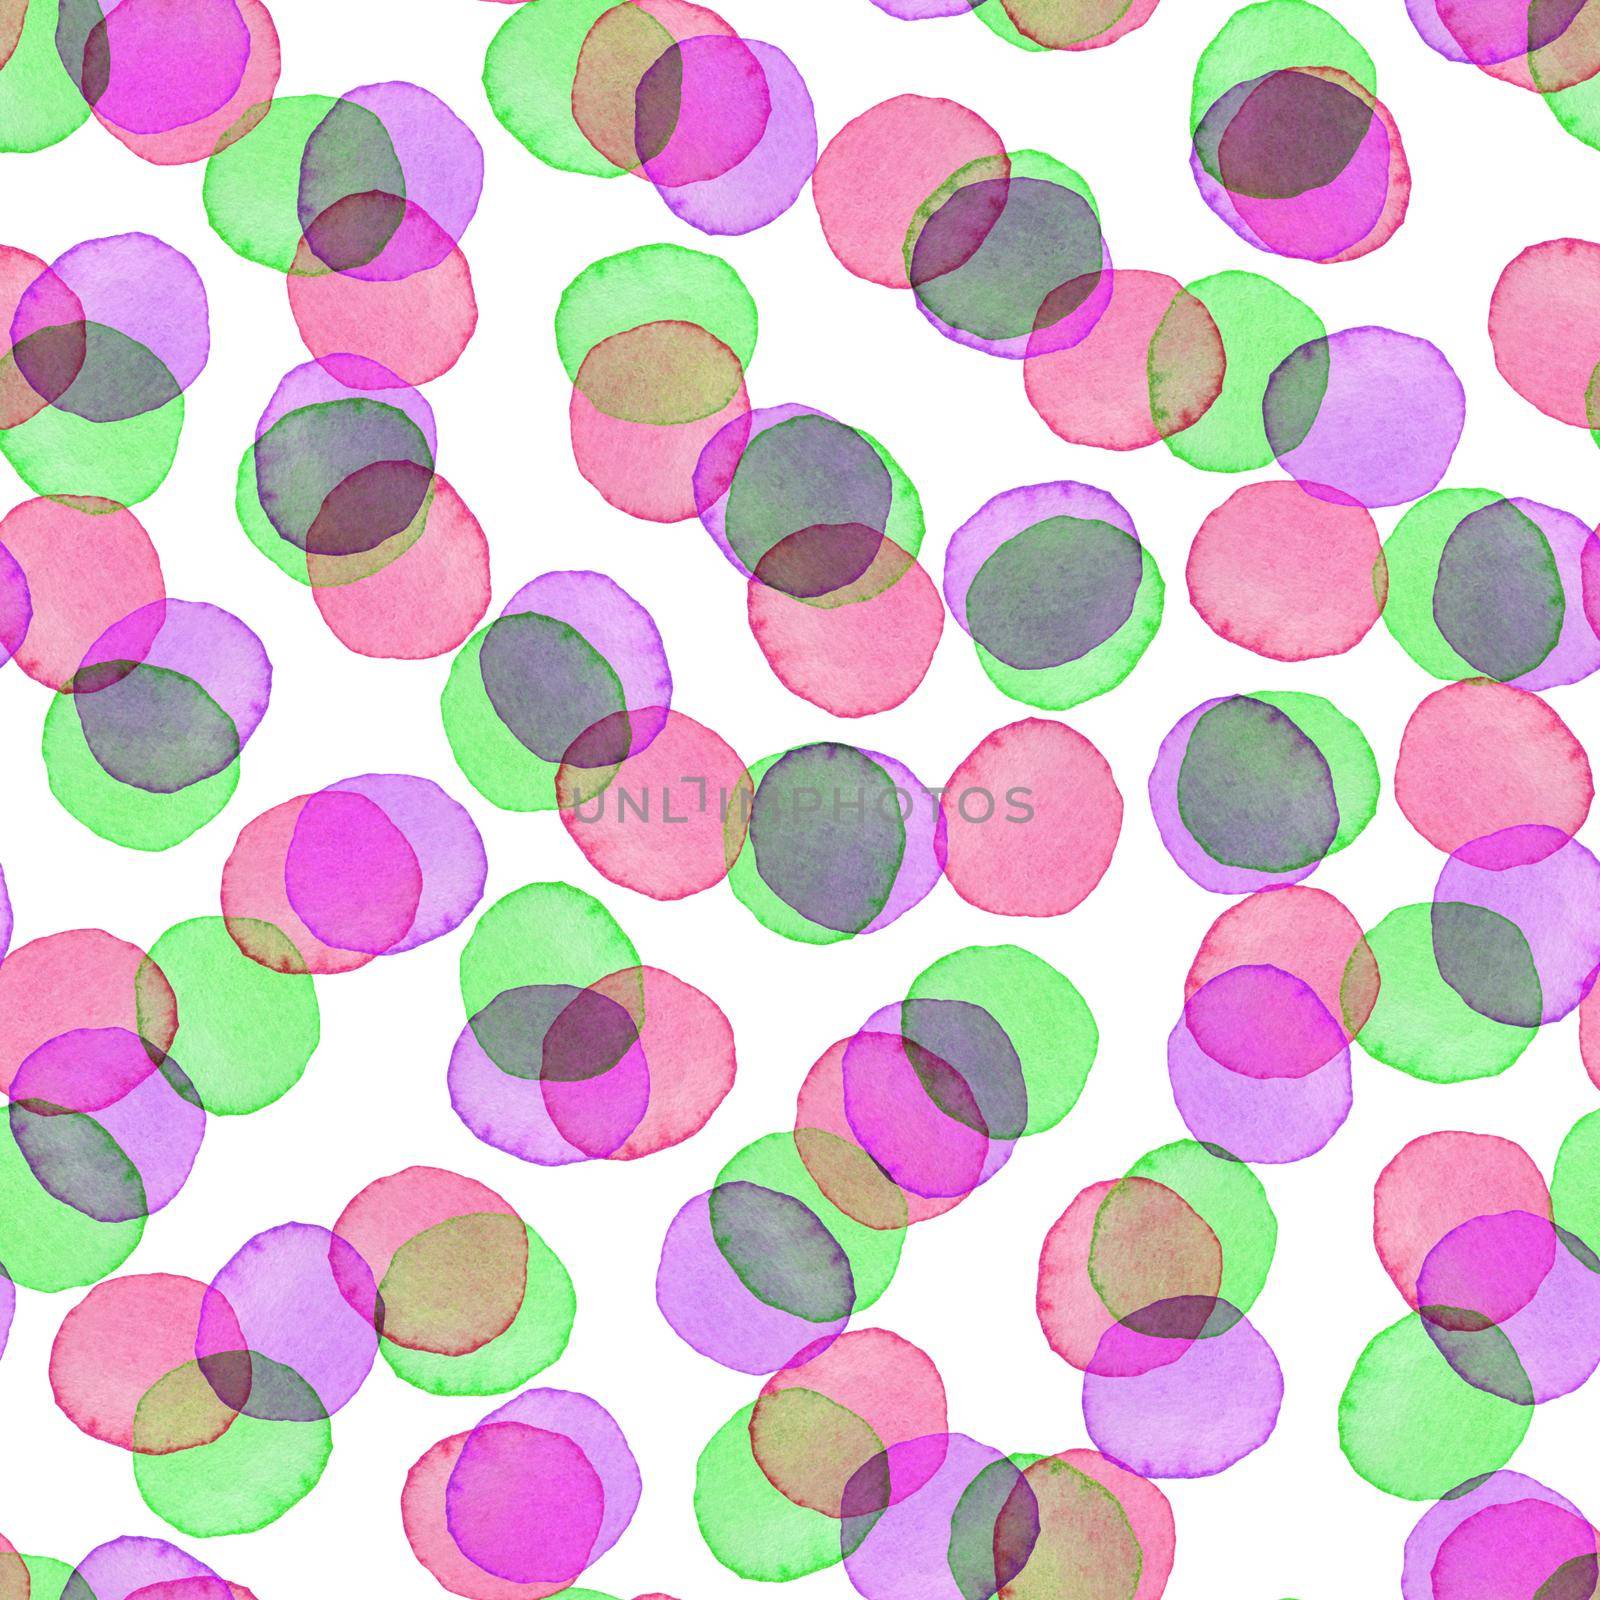 Hand Painted Brush Polka Dot Girly Seamless Watercolor Pattern. Abstract watercolour Round Circles in Purple Green Color. Artistic Design for Fabric and Background.